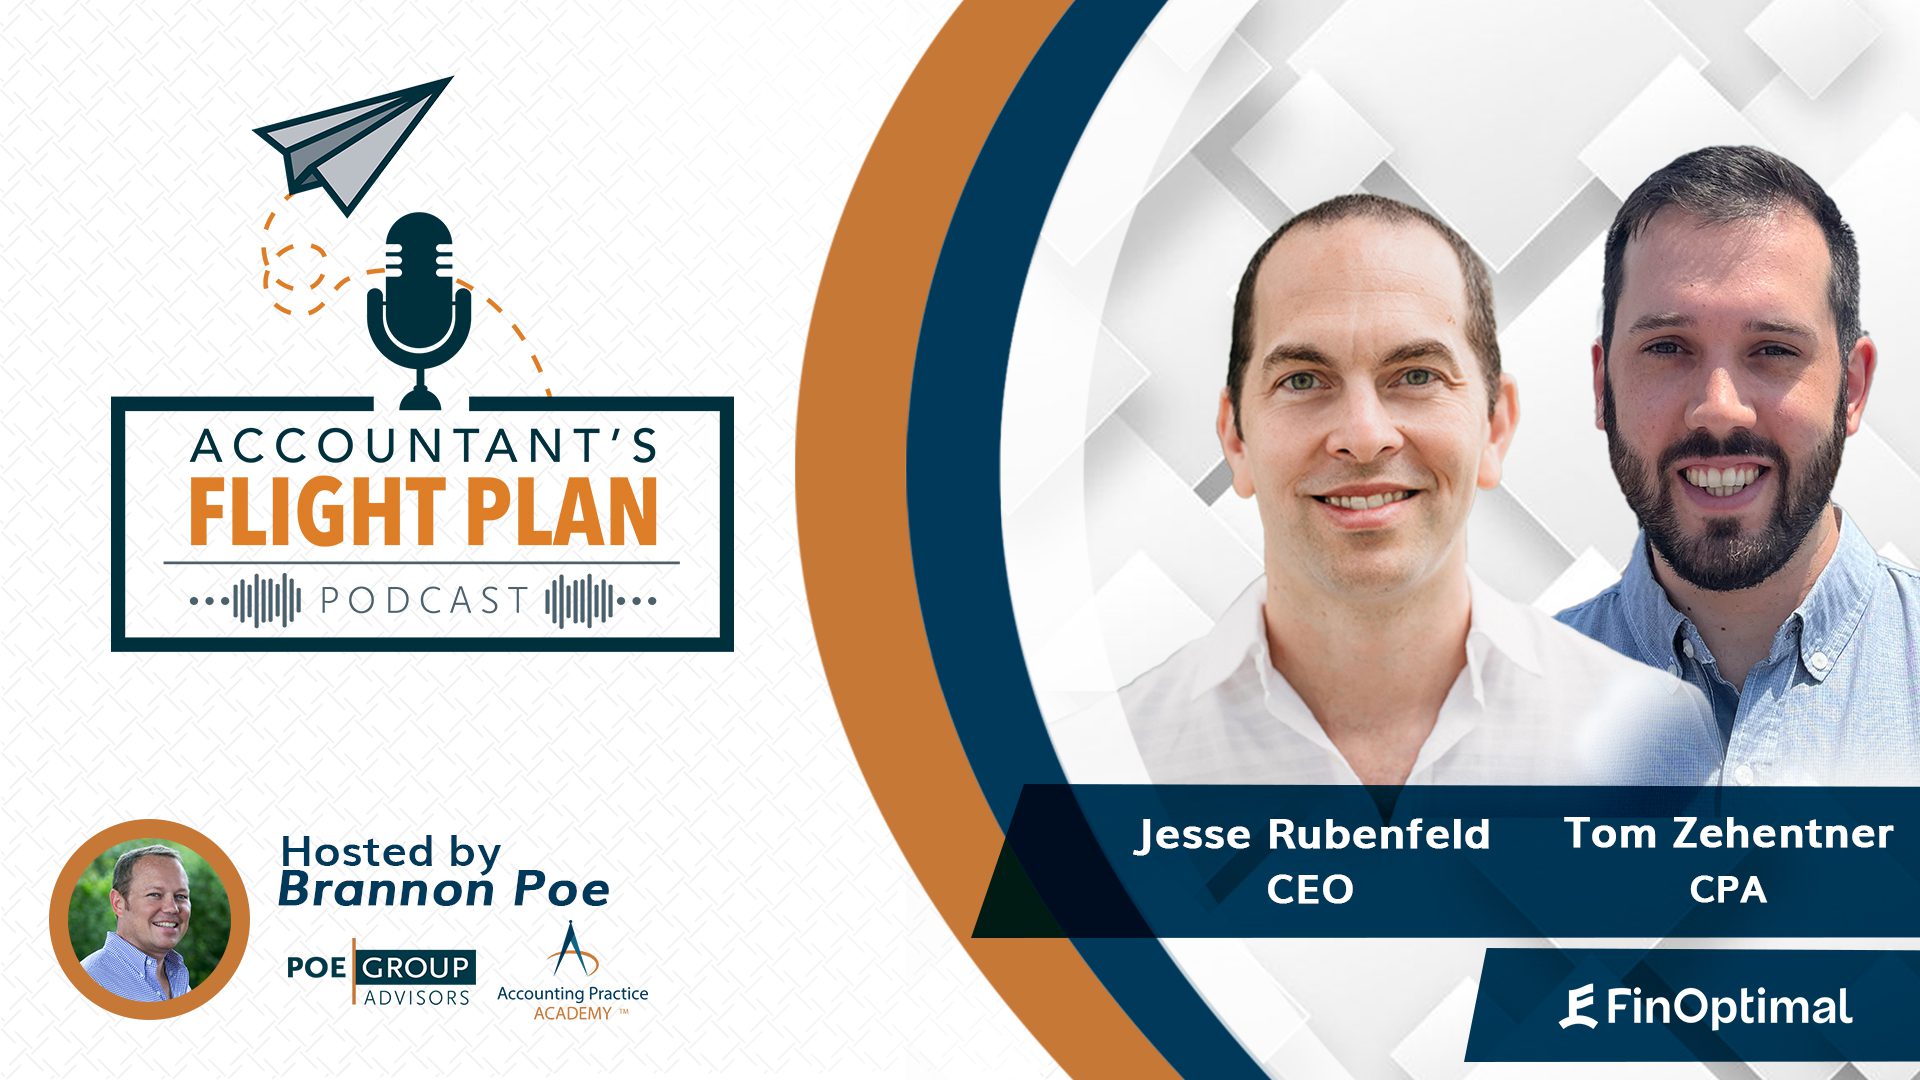 Accountant's Flight Plan Podcast with guests from FinOptimal